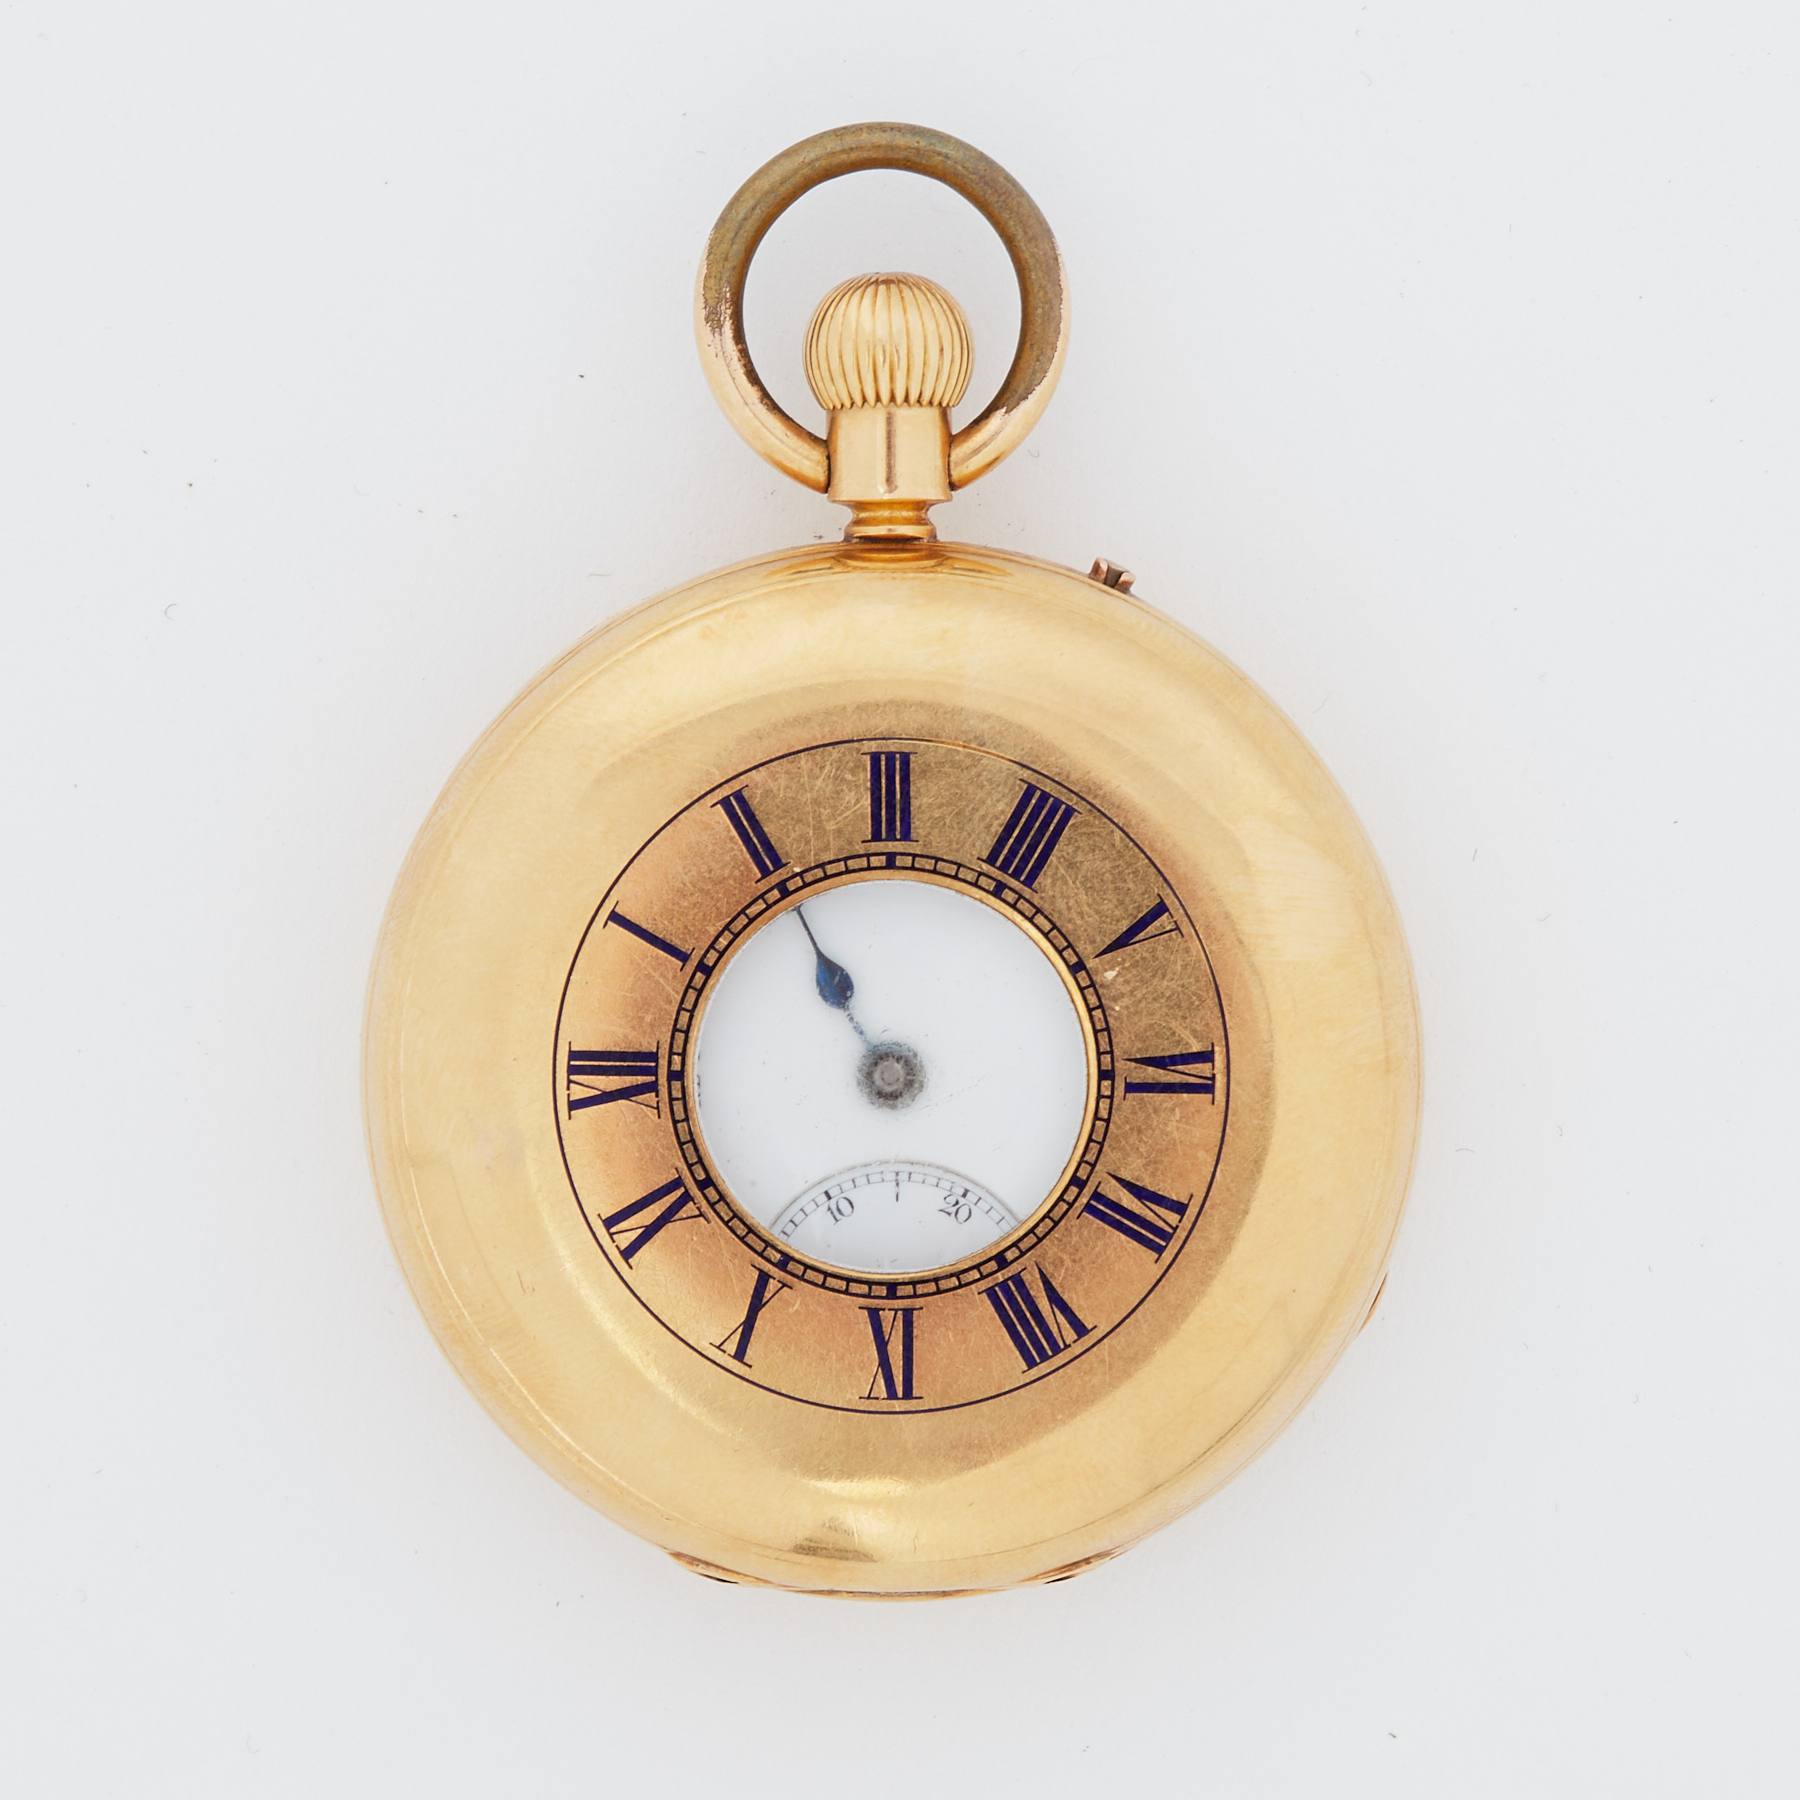 An 18ct. gold cased half hunter pocket watch by E. & E. Emanual of 3. The Hard, Portsea (